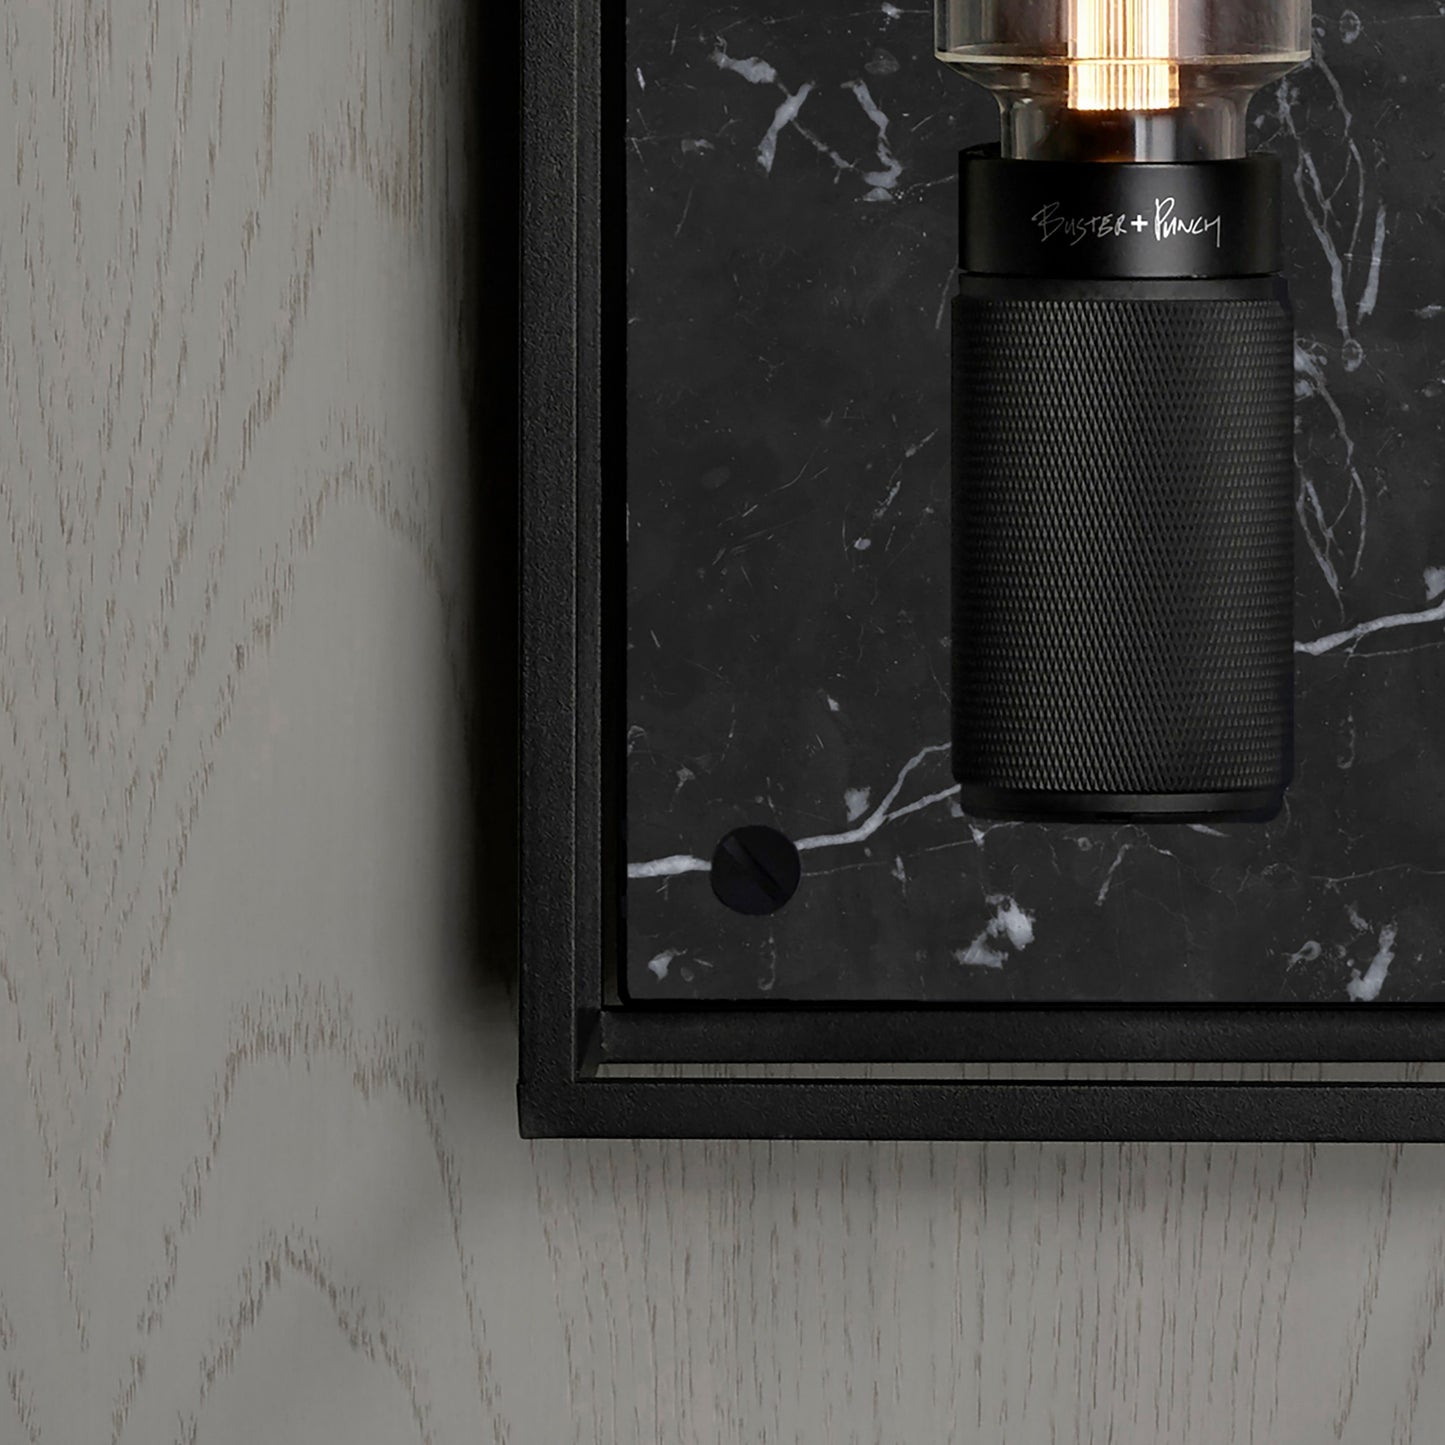 BUSTER AND PUNCH | X-LARGE CAGED WALL LIGHT - BLACK MARBLE - $1,649.00